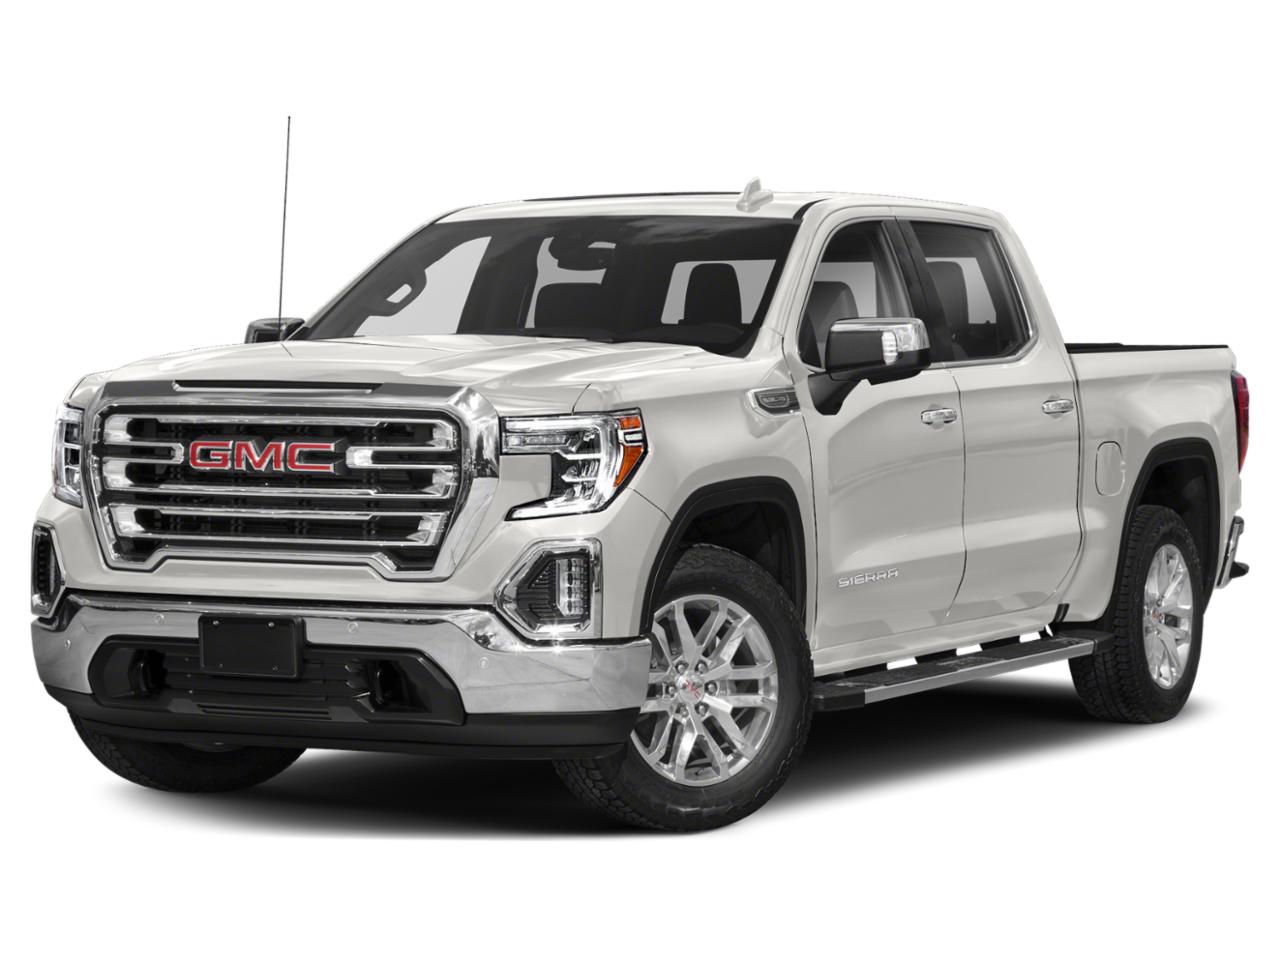 Used, Certified 2020 GMC Sierra 1500 Vehicles for Sale